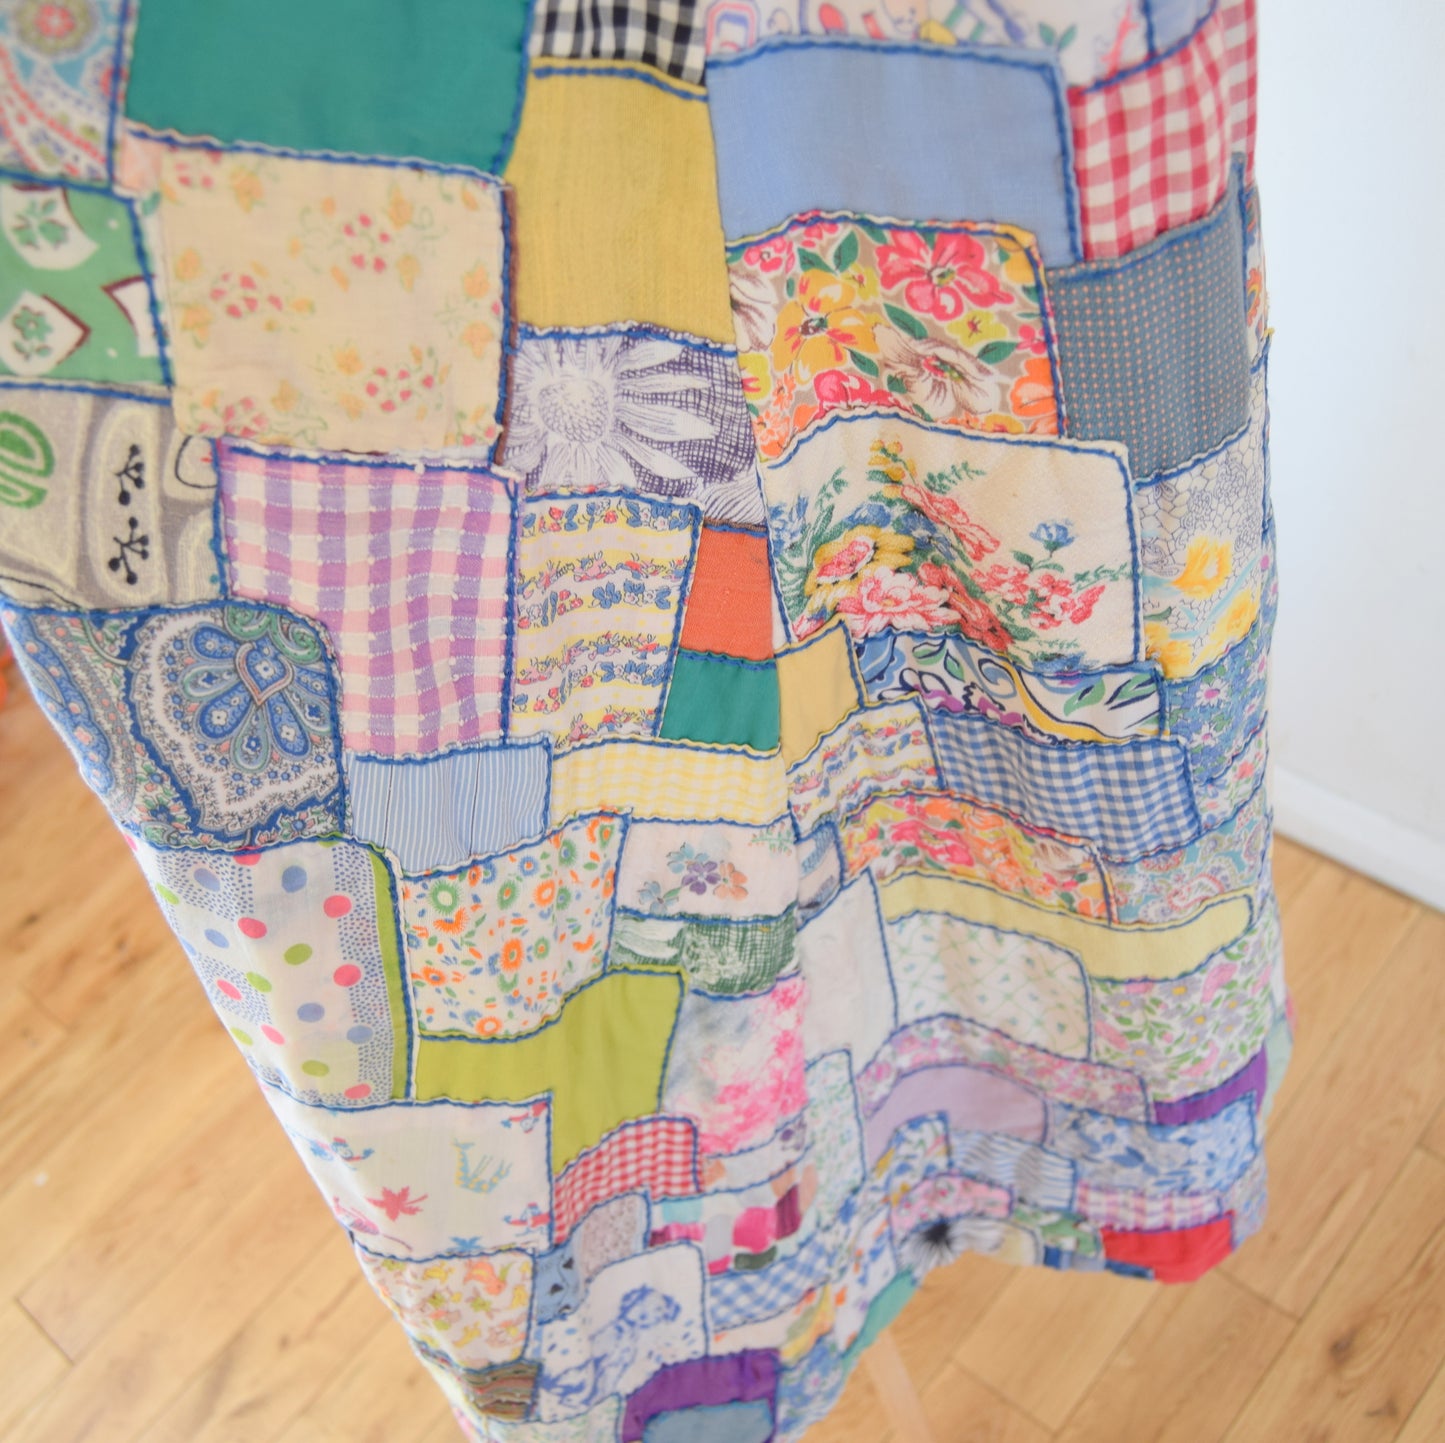 Vintage 1950s Fabric Patchwork Hooded Cape - Amazing!